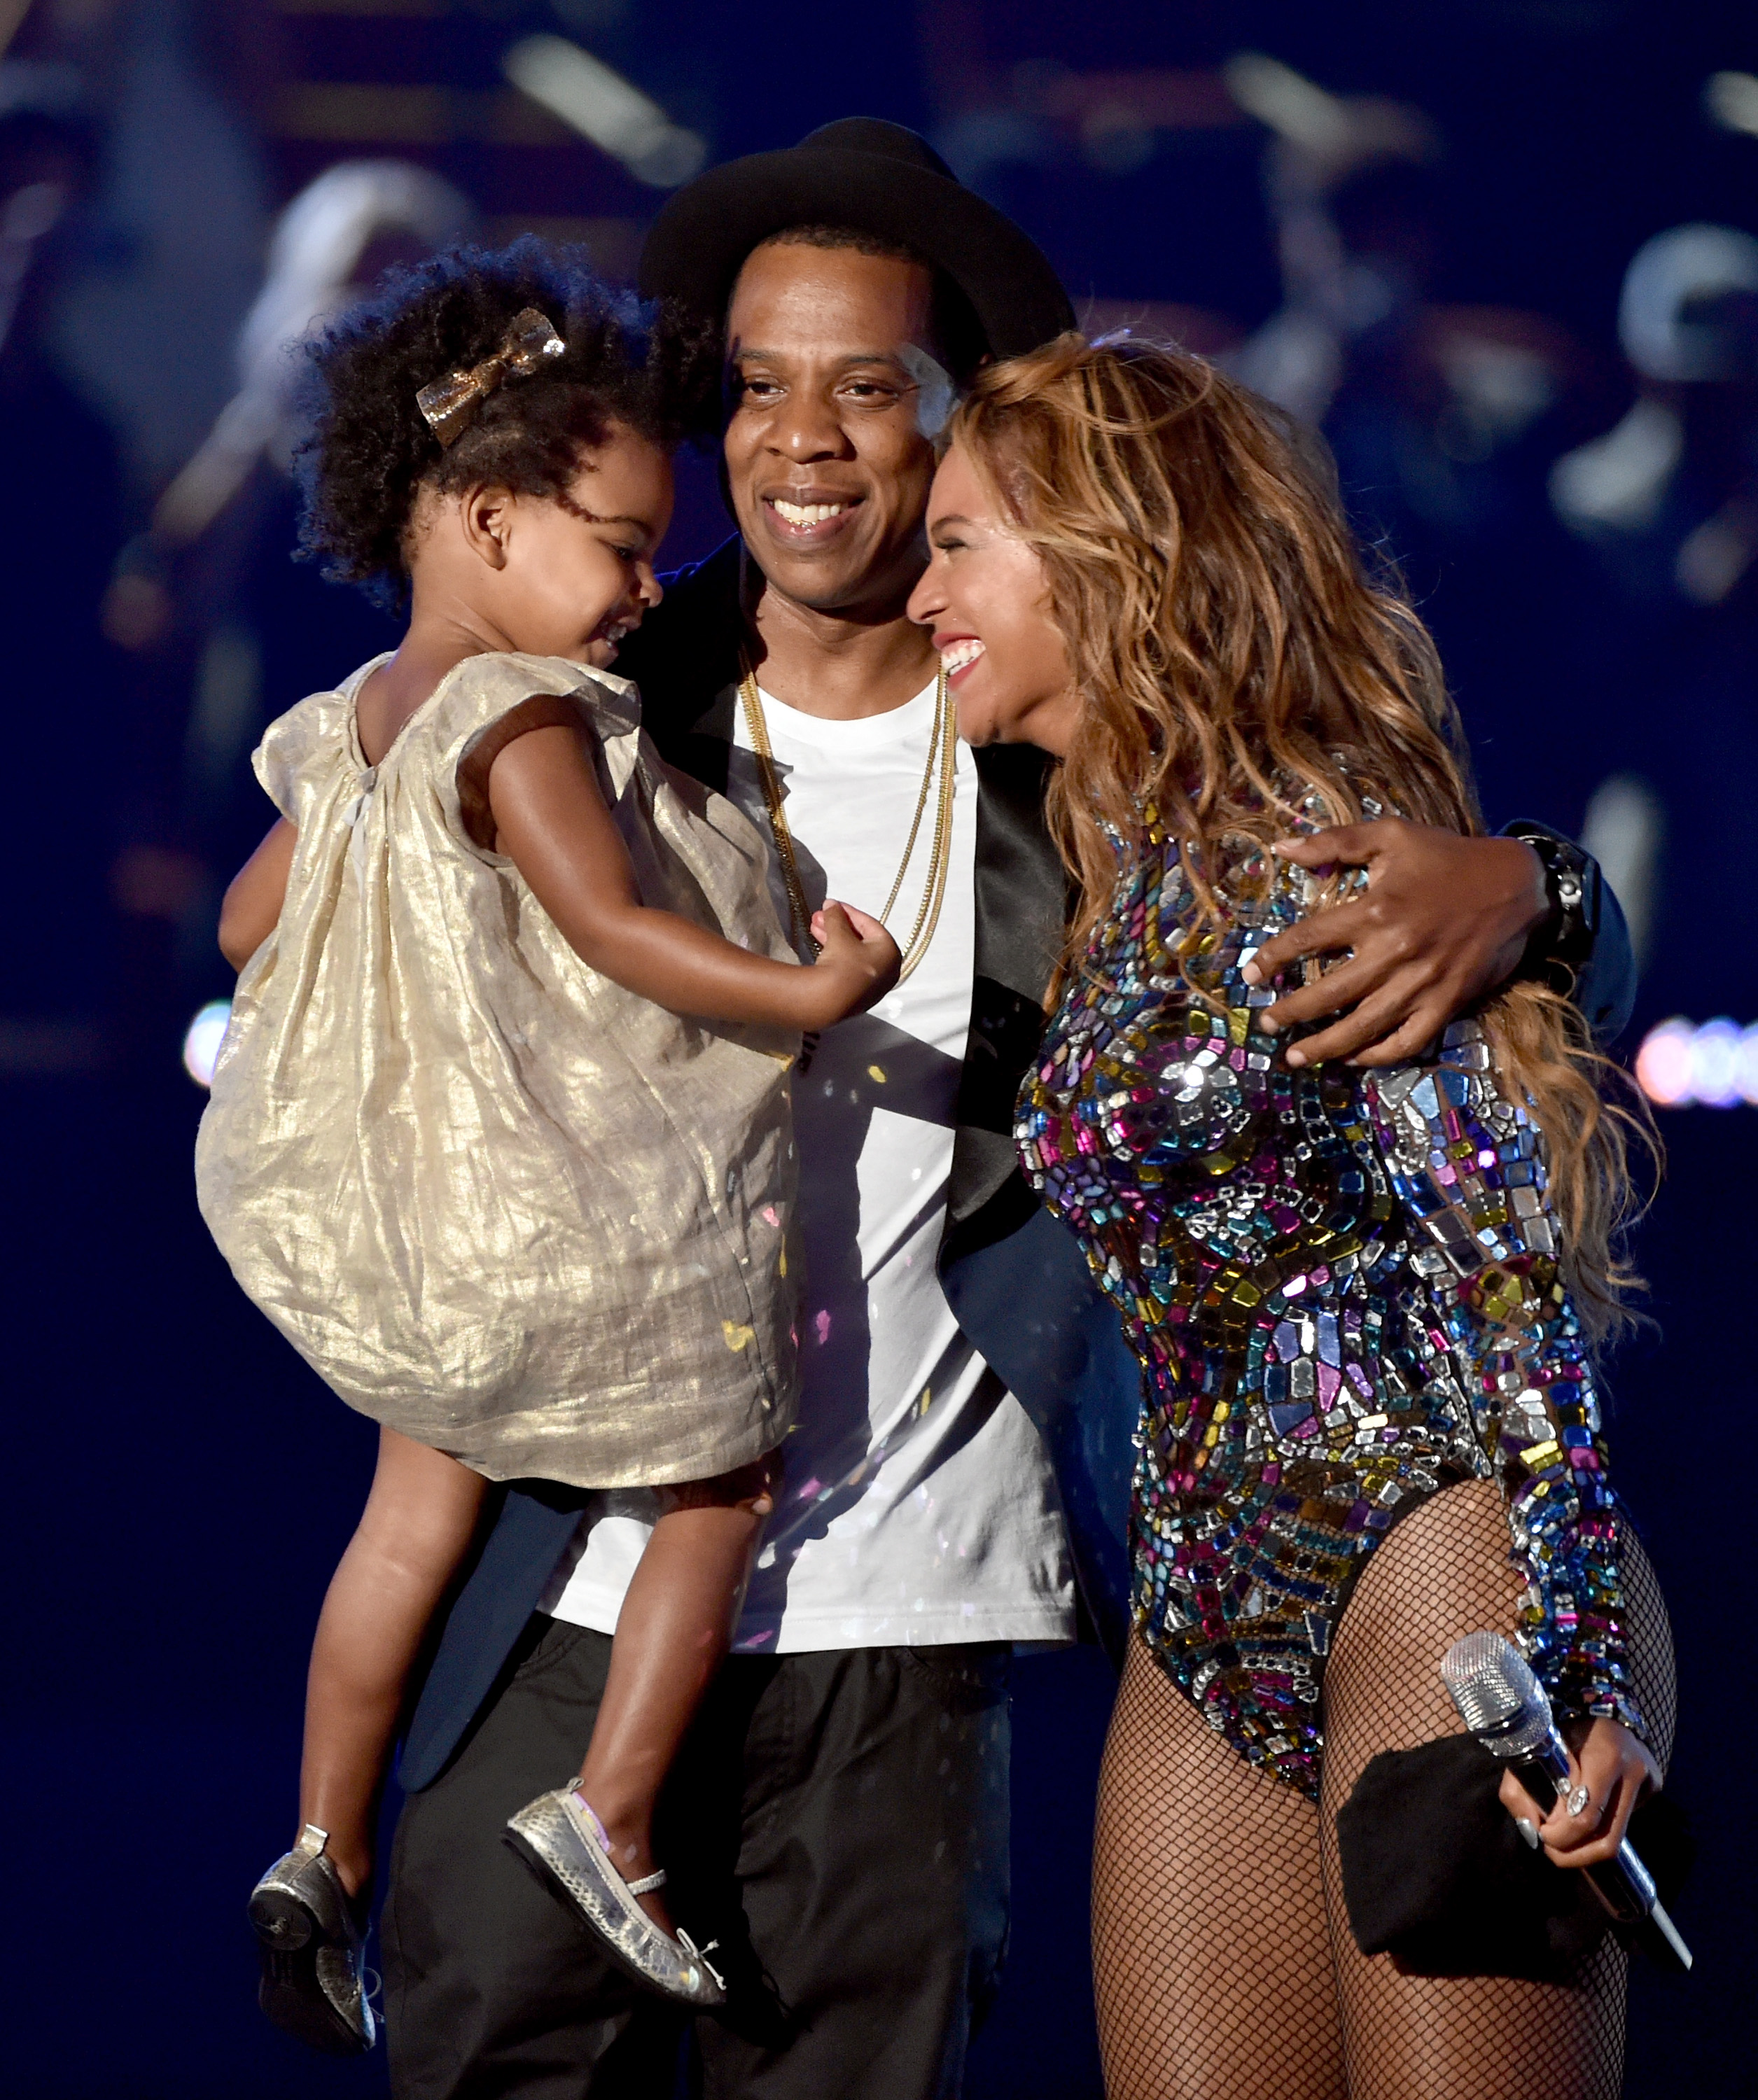 Rapper Jay Z and his wife singer Beyonce with their daughter Blue Ivy Carter onstage during the 2014 MTV Video Music Awards at The Forum on August 24, 2014 in Inglewood, California | Source: Getty Images